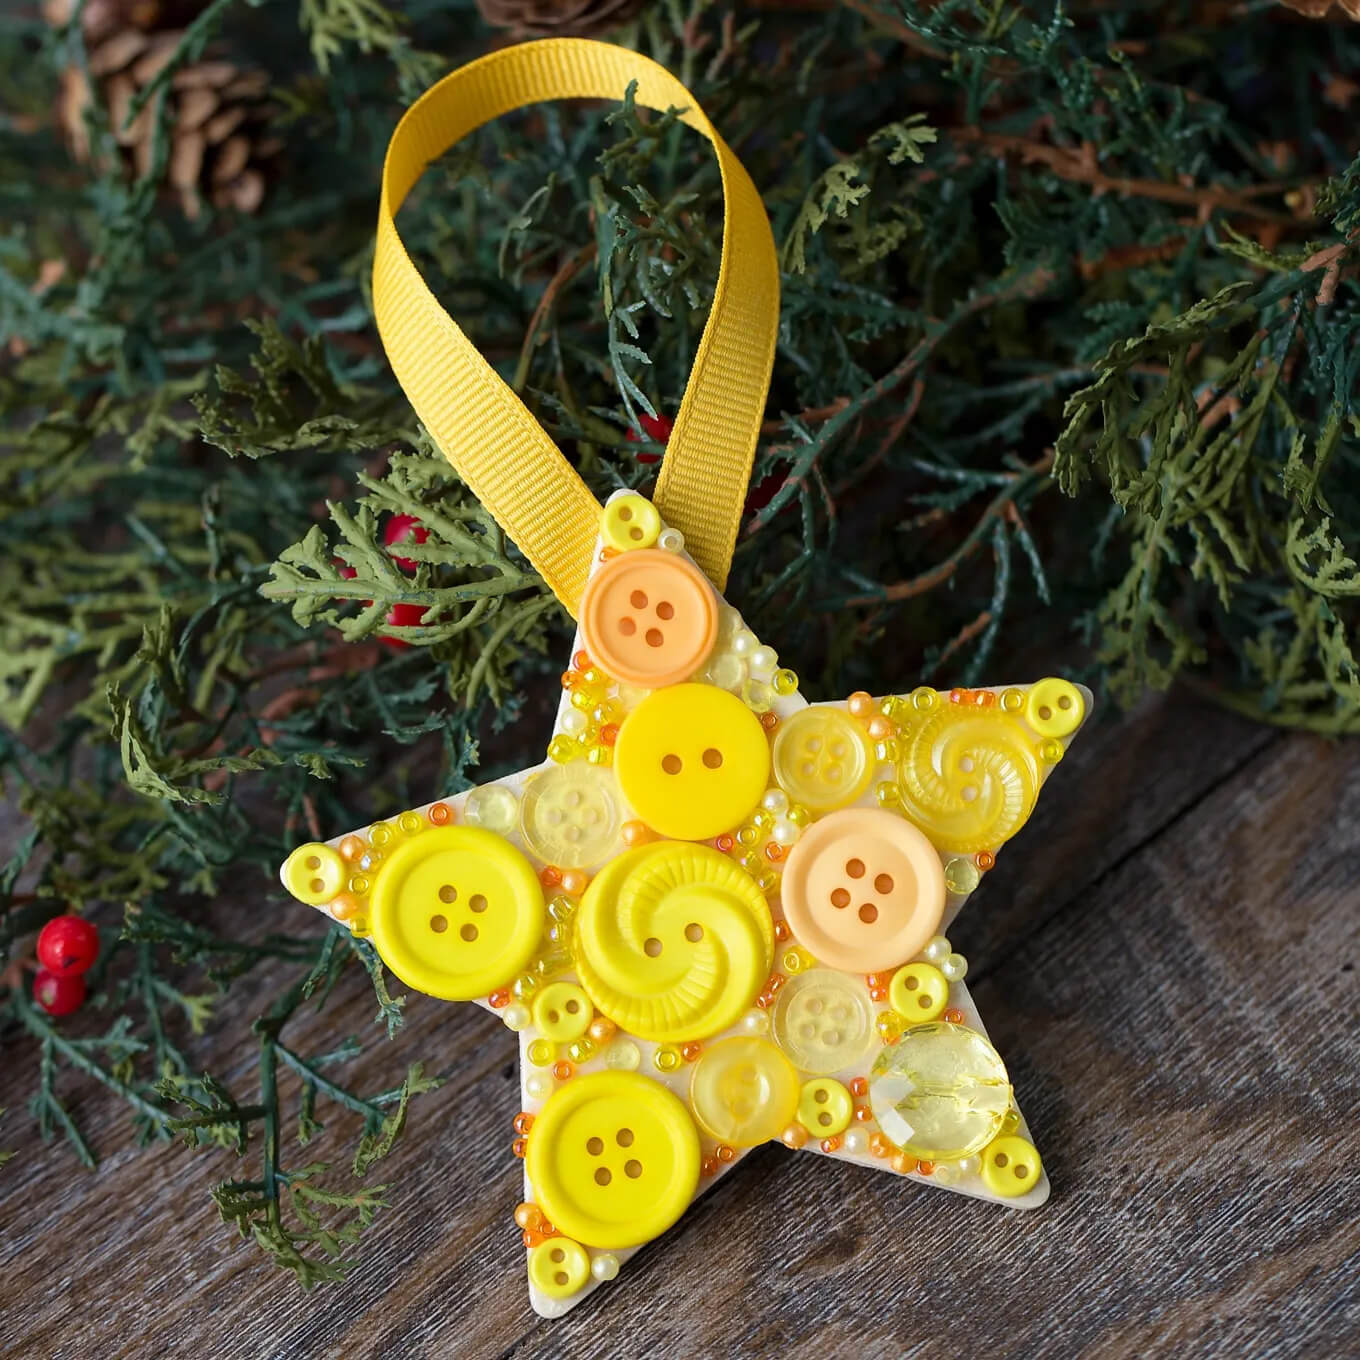 Simple Star Ornament Craft For Christmas